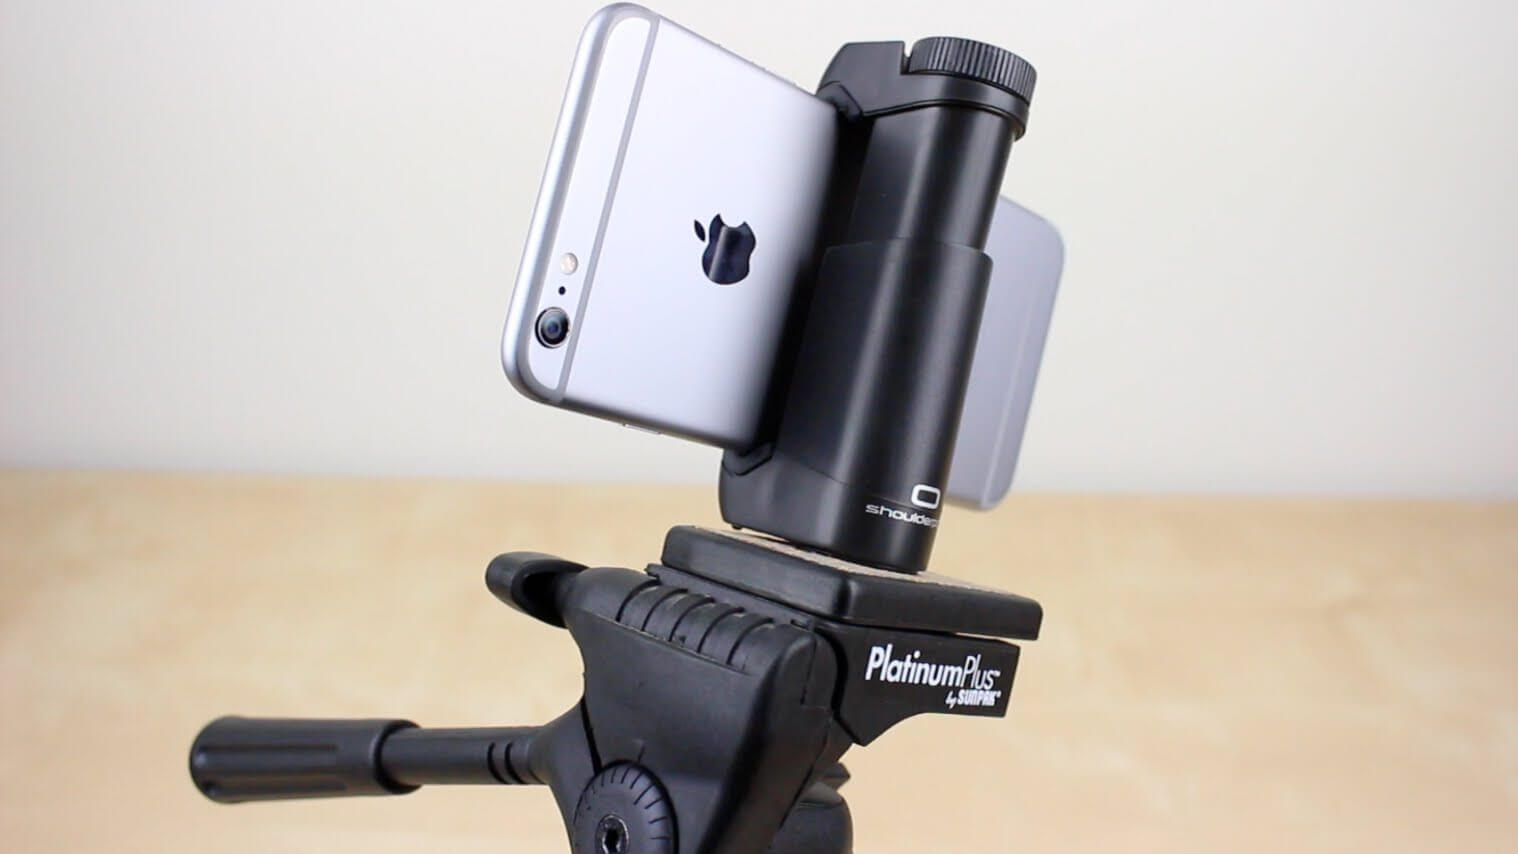 Tripod For Smartphones: smartphone photography tips